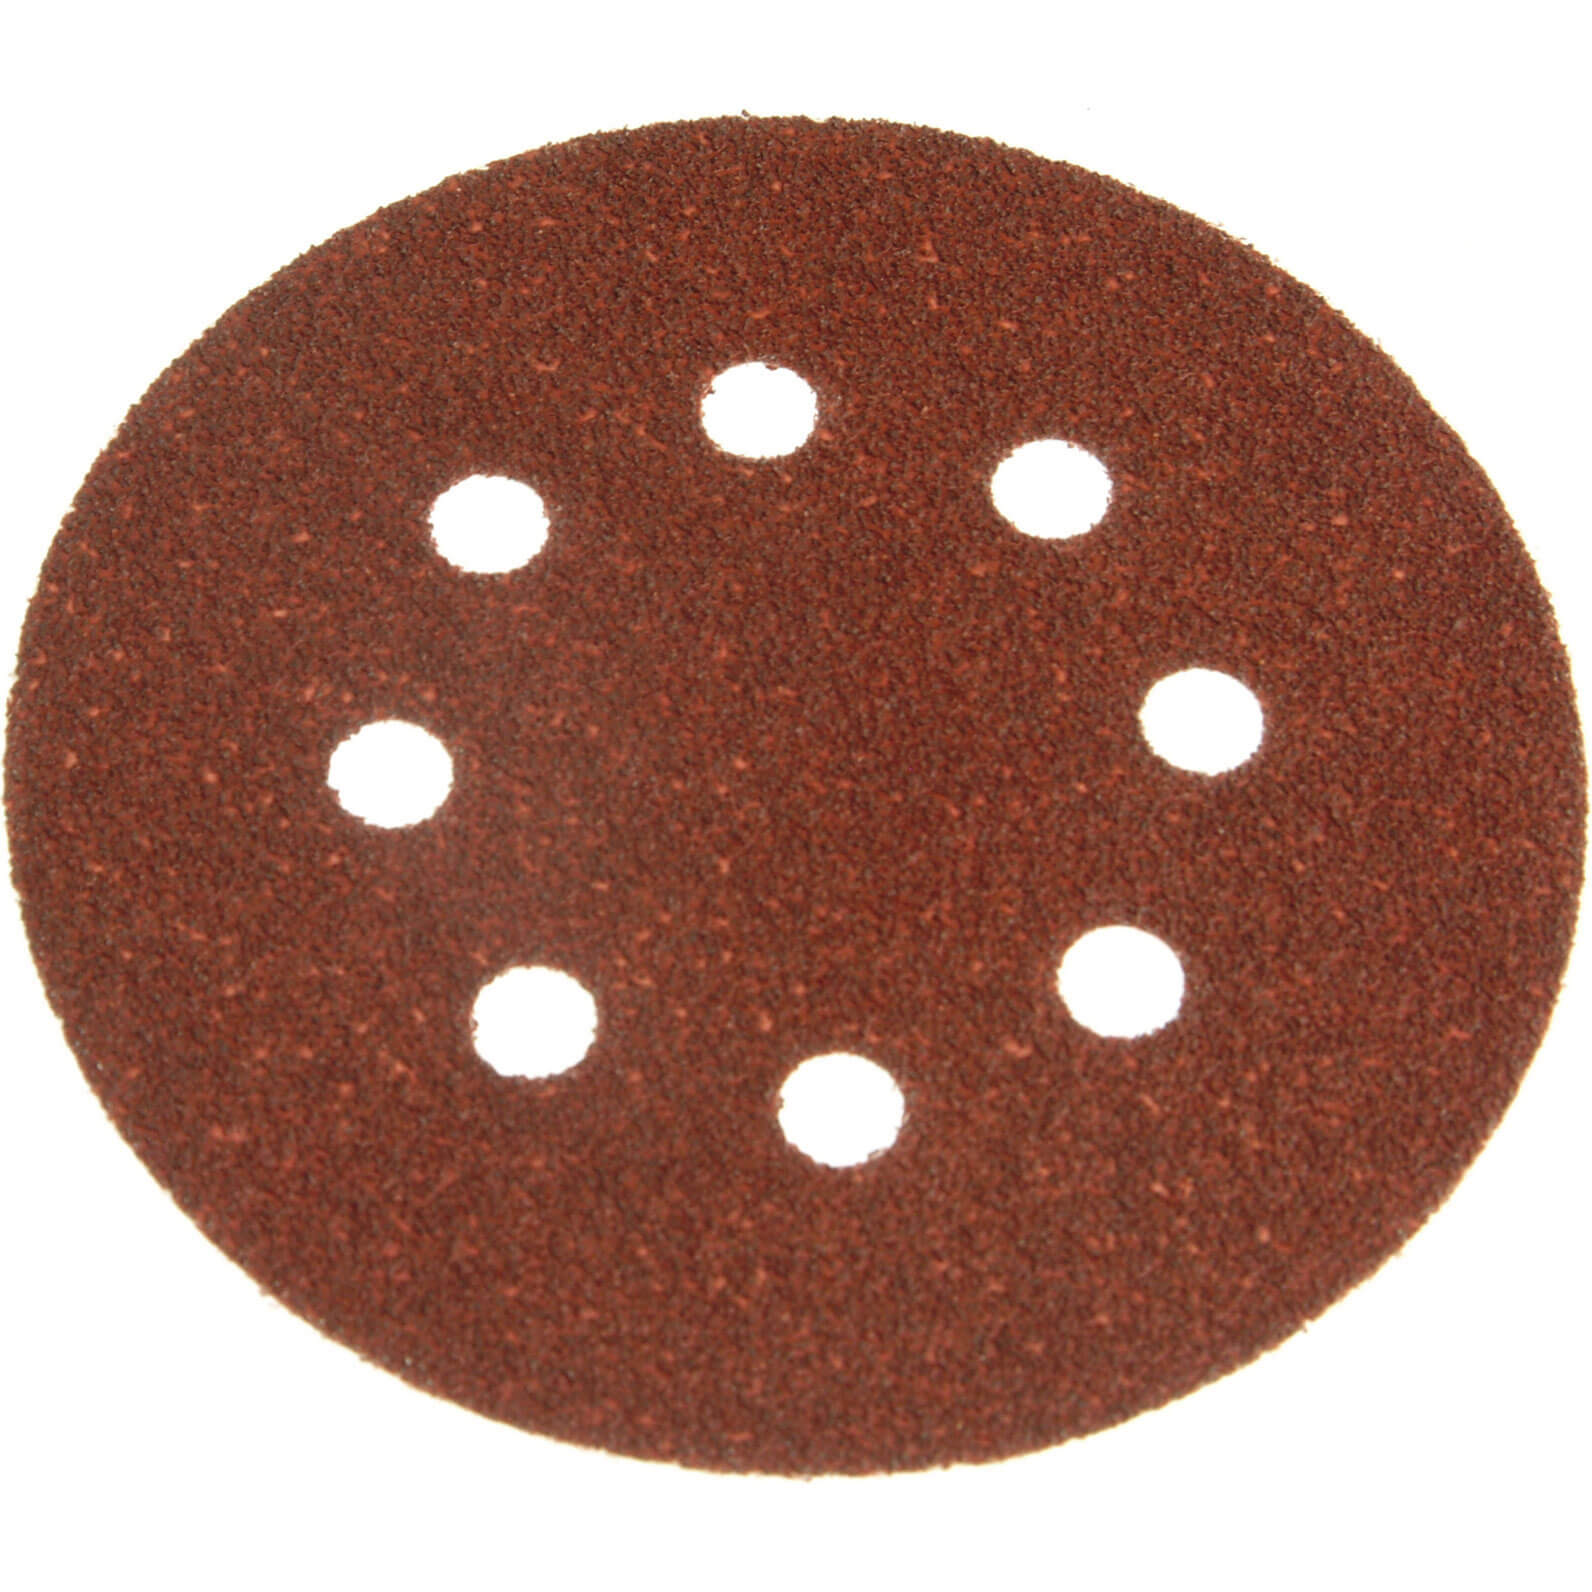 Image of Black and Decker Piranha Quick Fit ROS Sanding Discs 125mm 125mm 40g Pack of 5